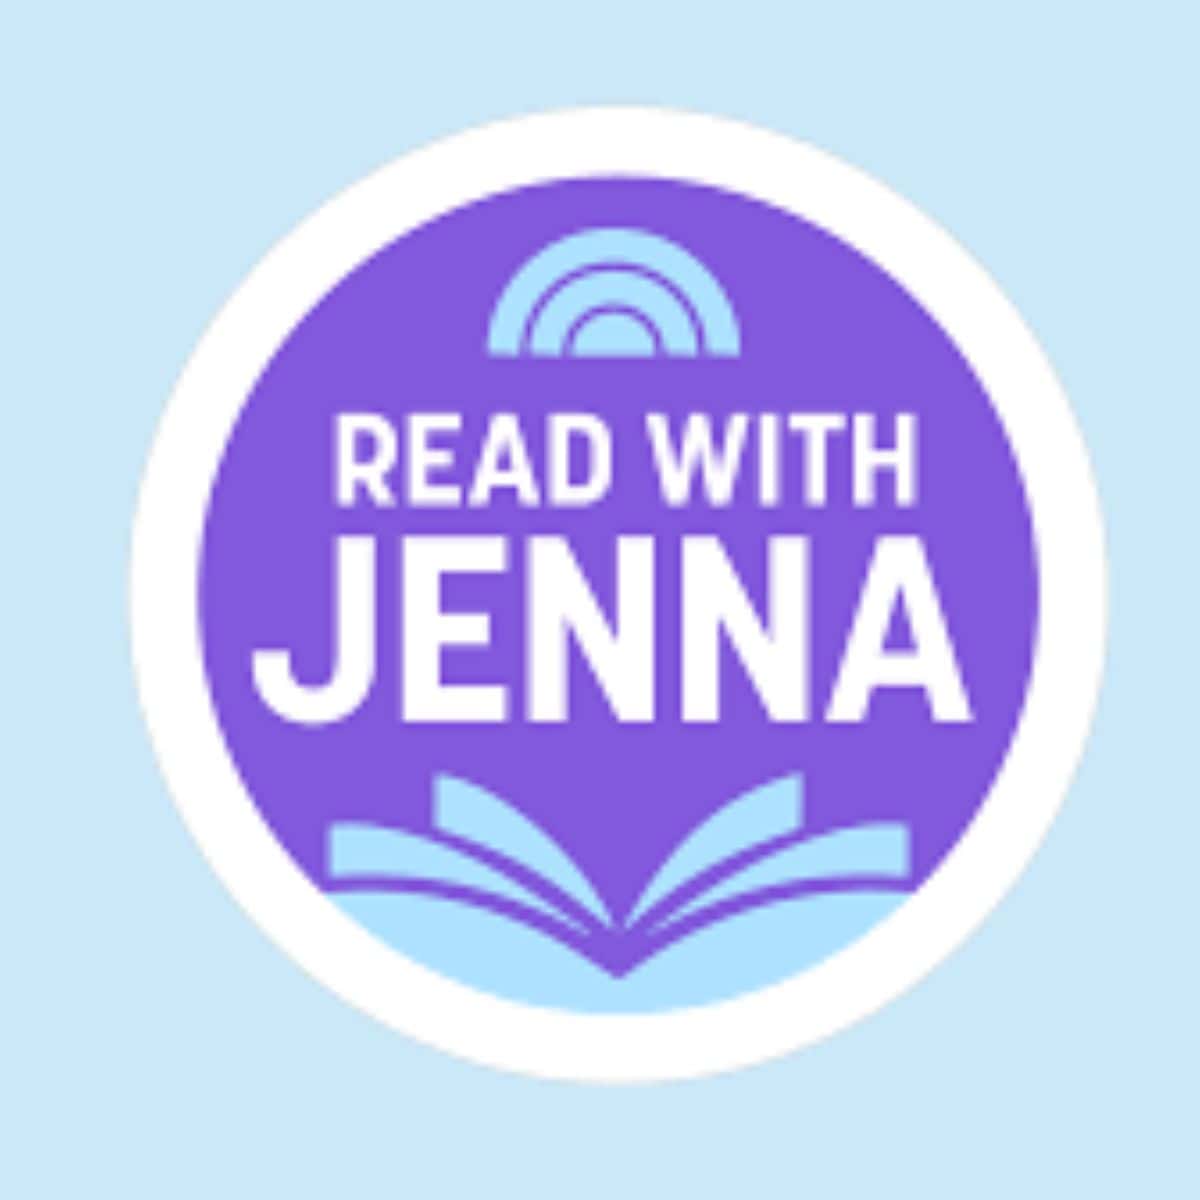 Today Show’s Read With Jenna Book Club List +PDF (Updated)